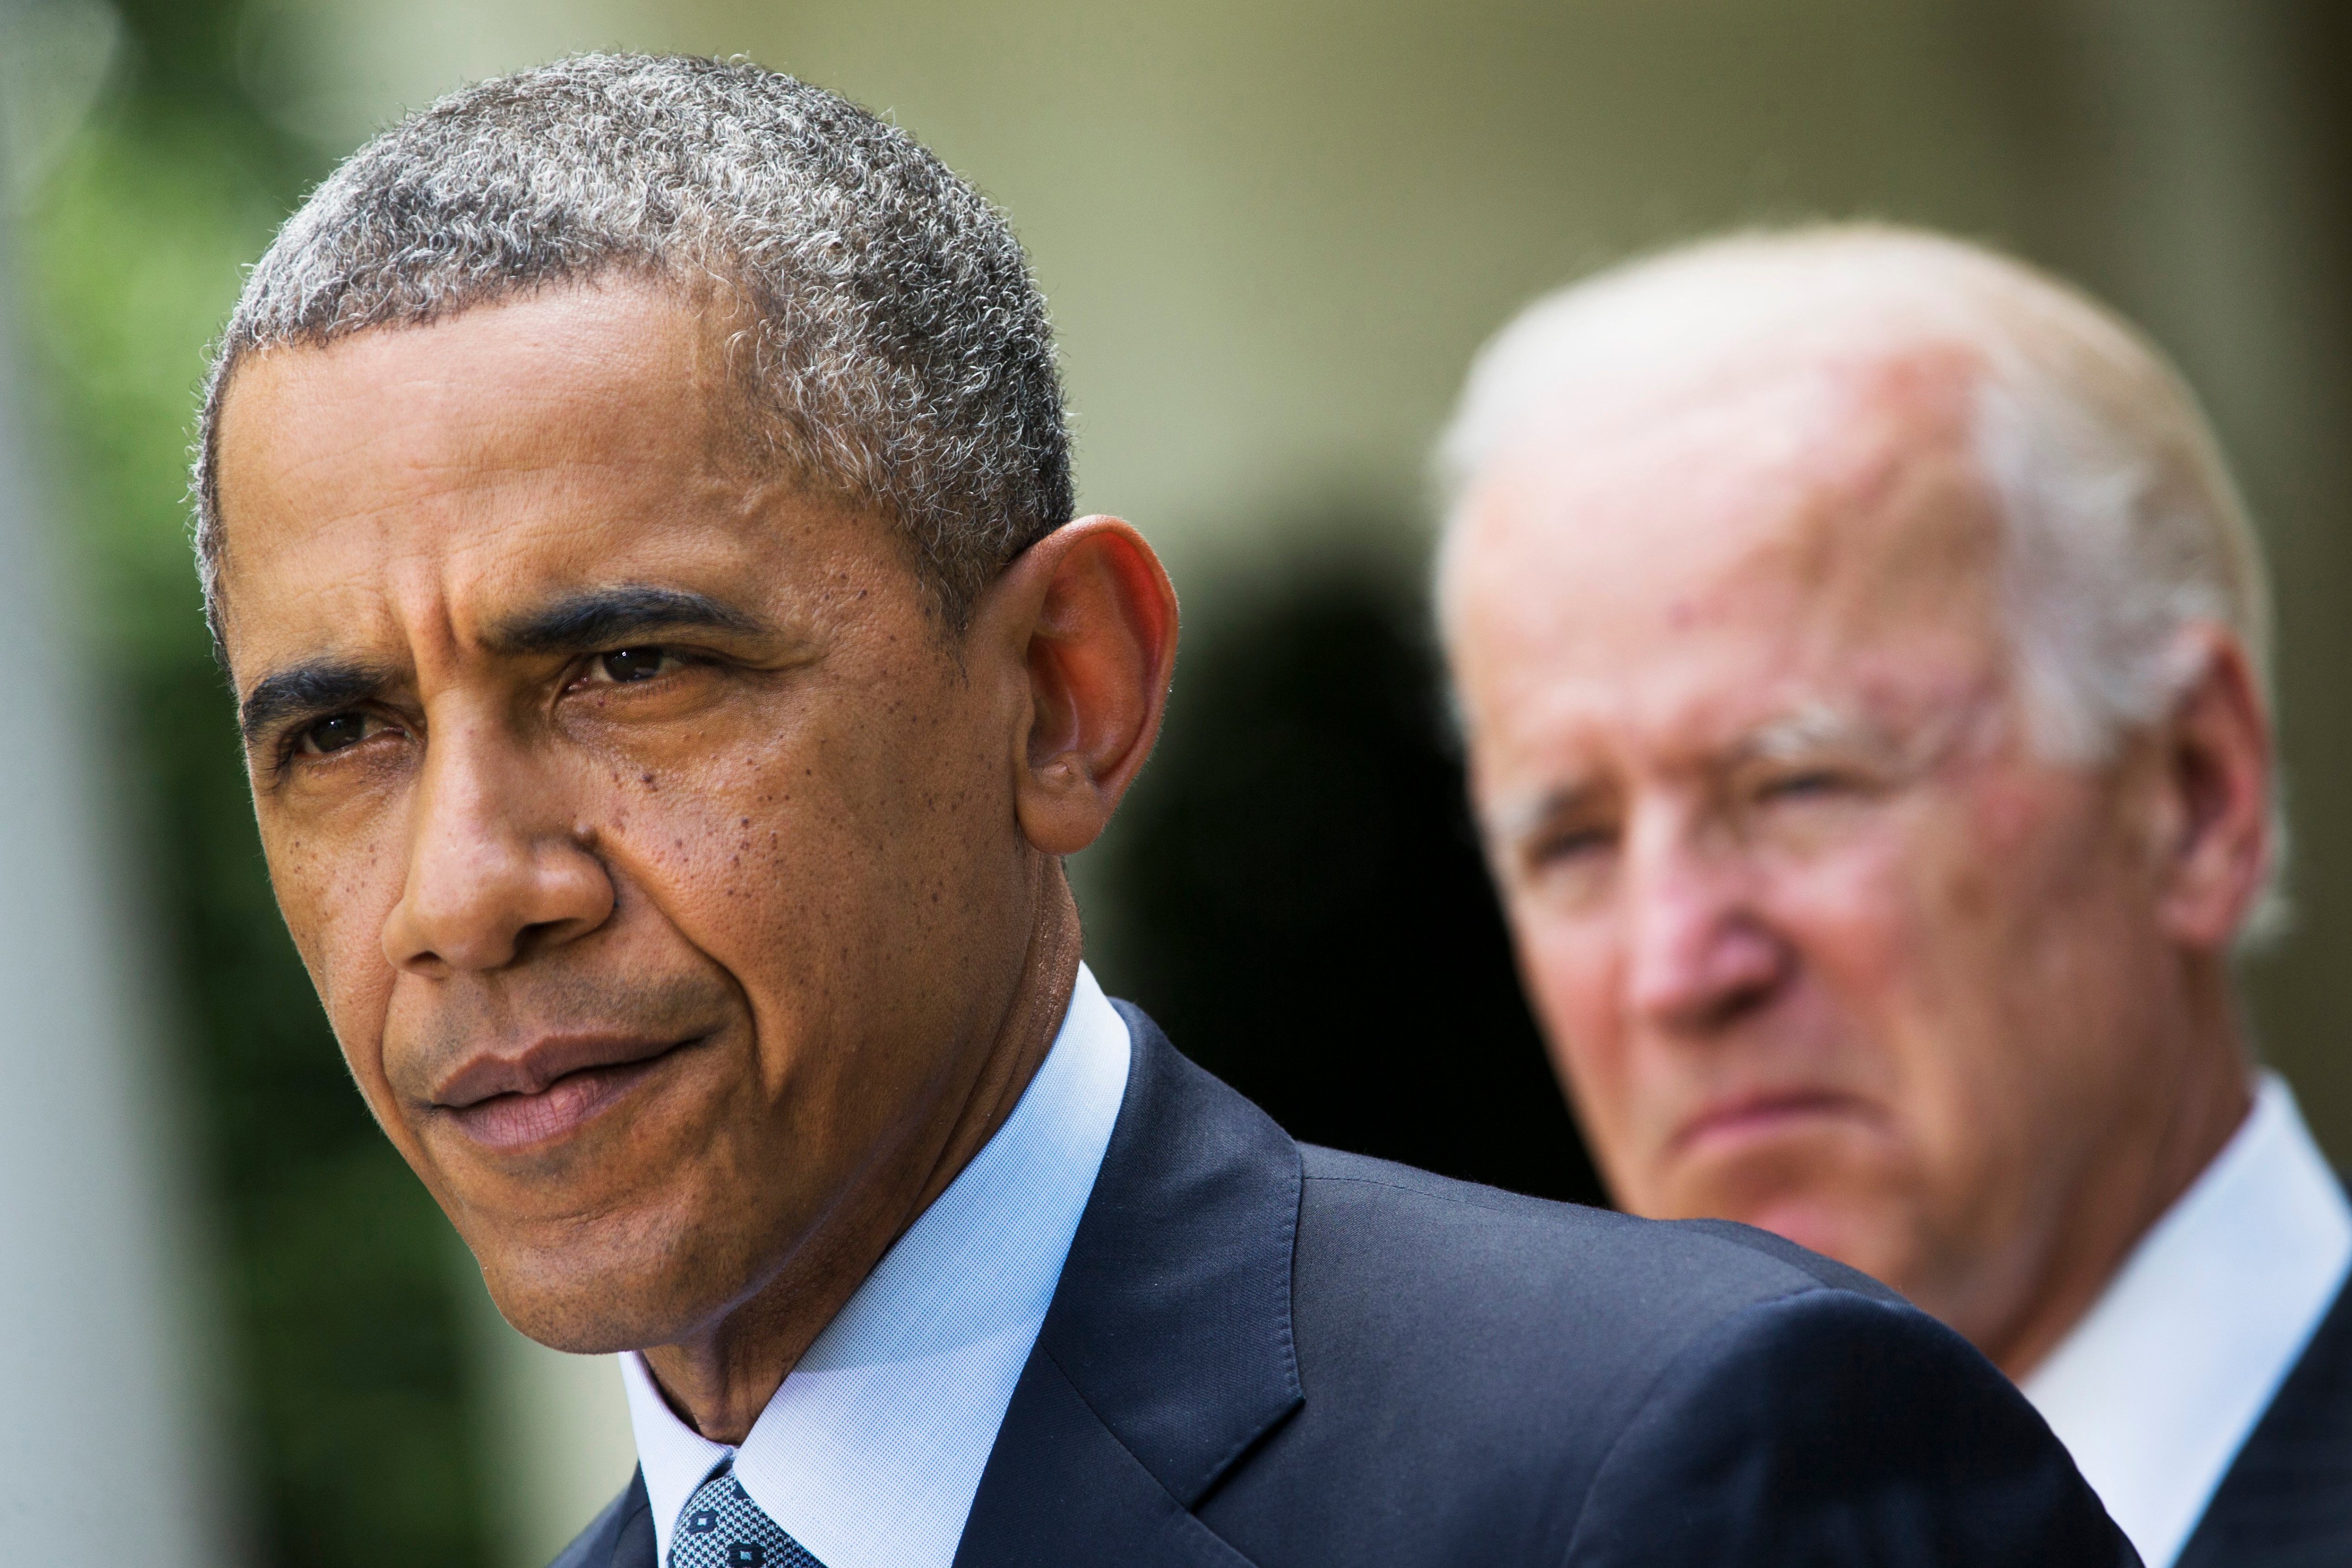 President Barack Obama, accompanied by Vice President Joe Biden, pauses while making a statement about immigration reform, in the Rose Garden of the White House in Washington on June 13, 2014. (Jacquelyn Martin—AP)